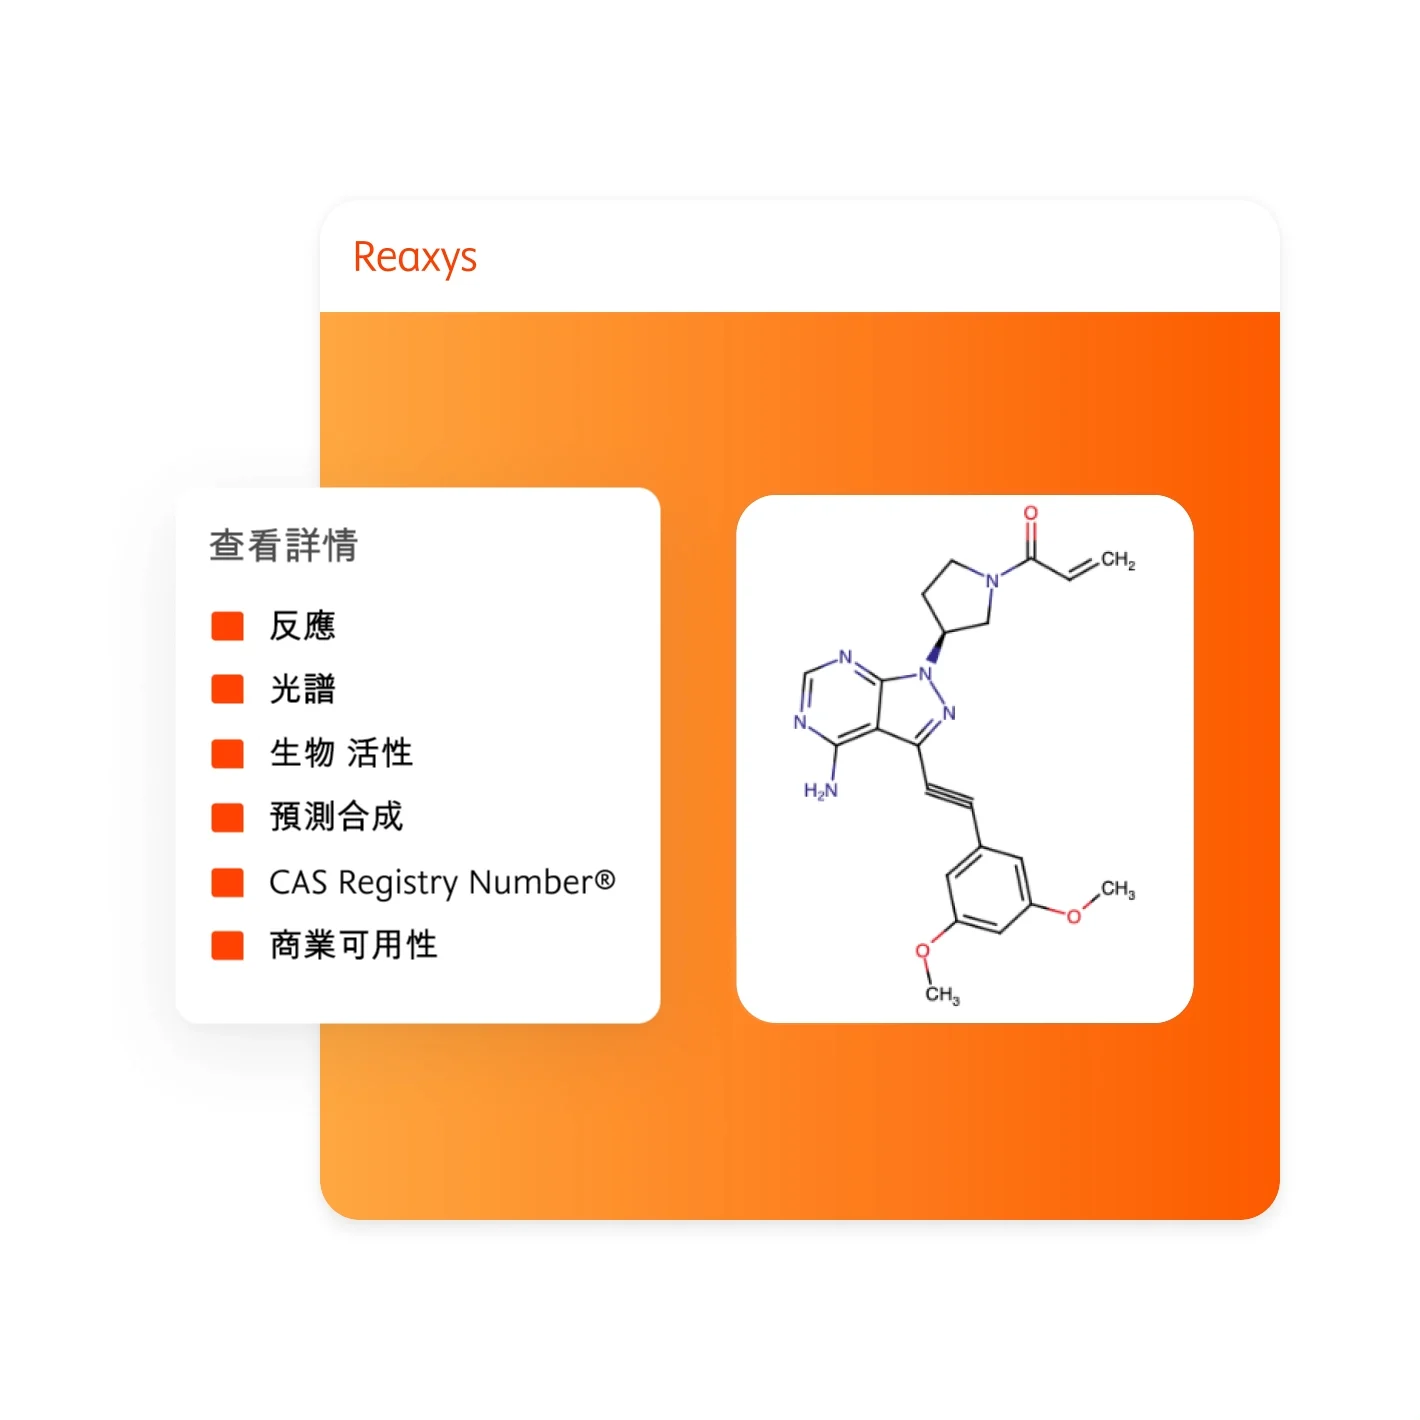 Reaxys product features and chemical formula